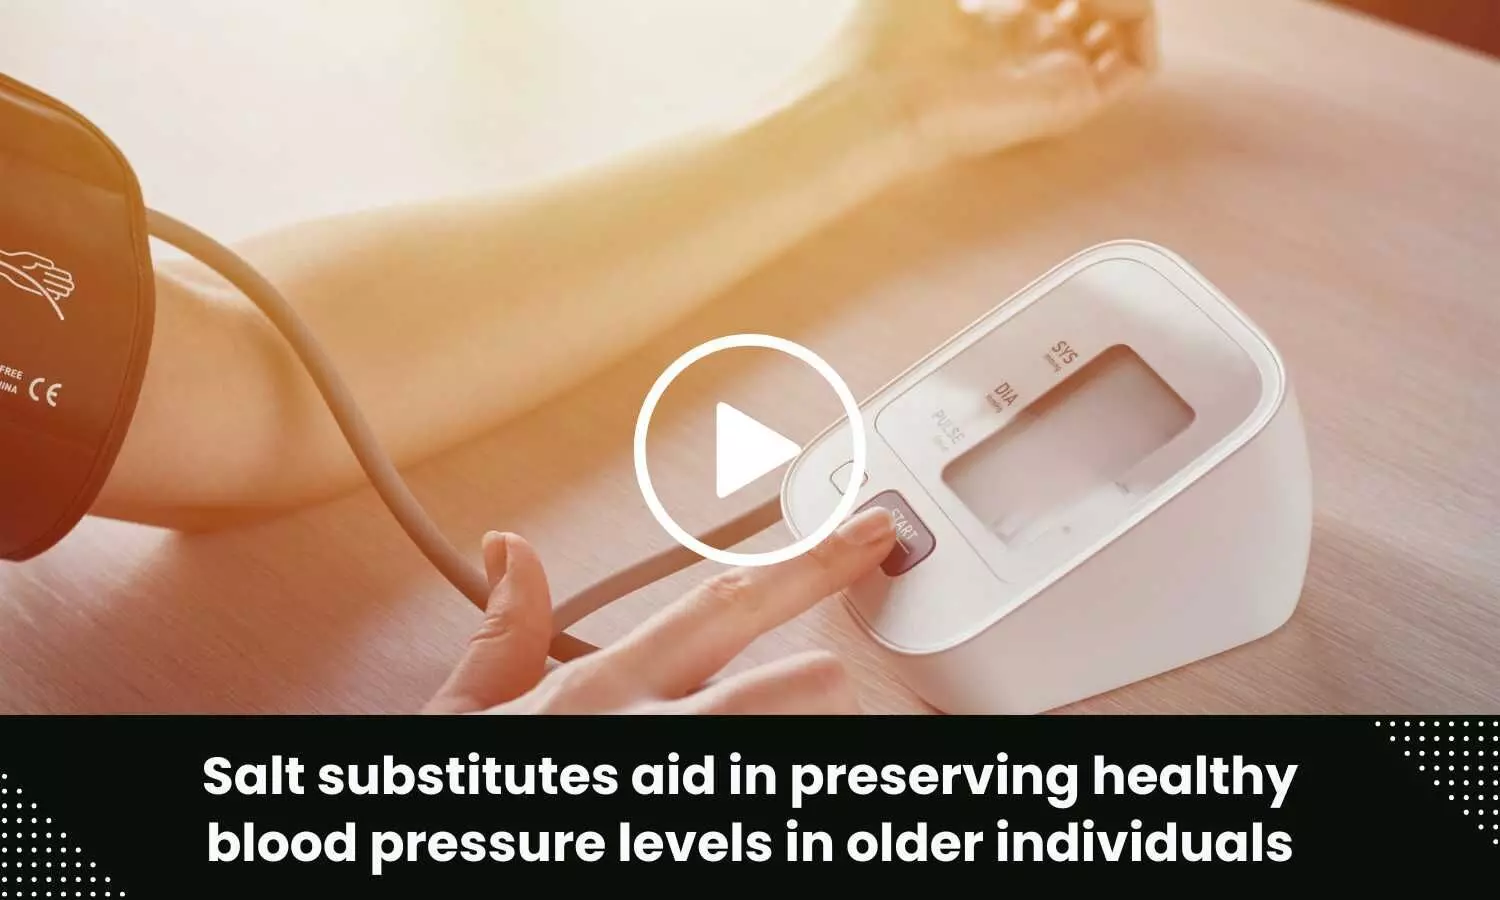 Salt substitutes aid in preserving healthy blood pressure levels in older individuals